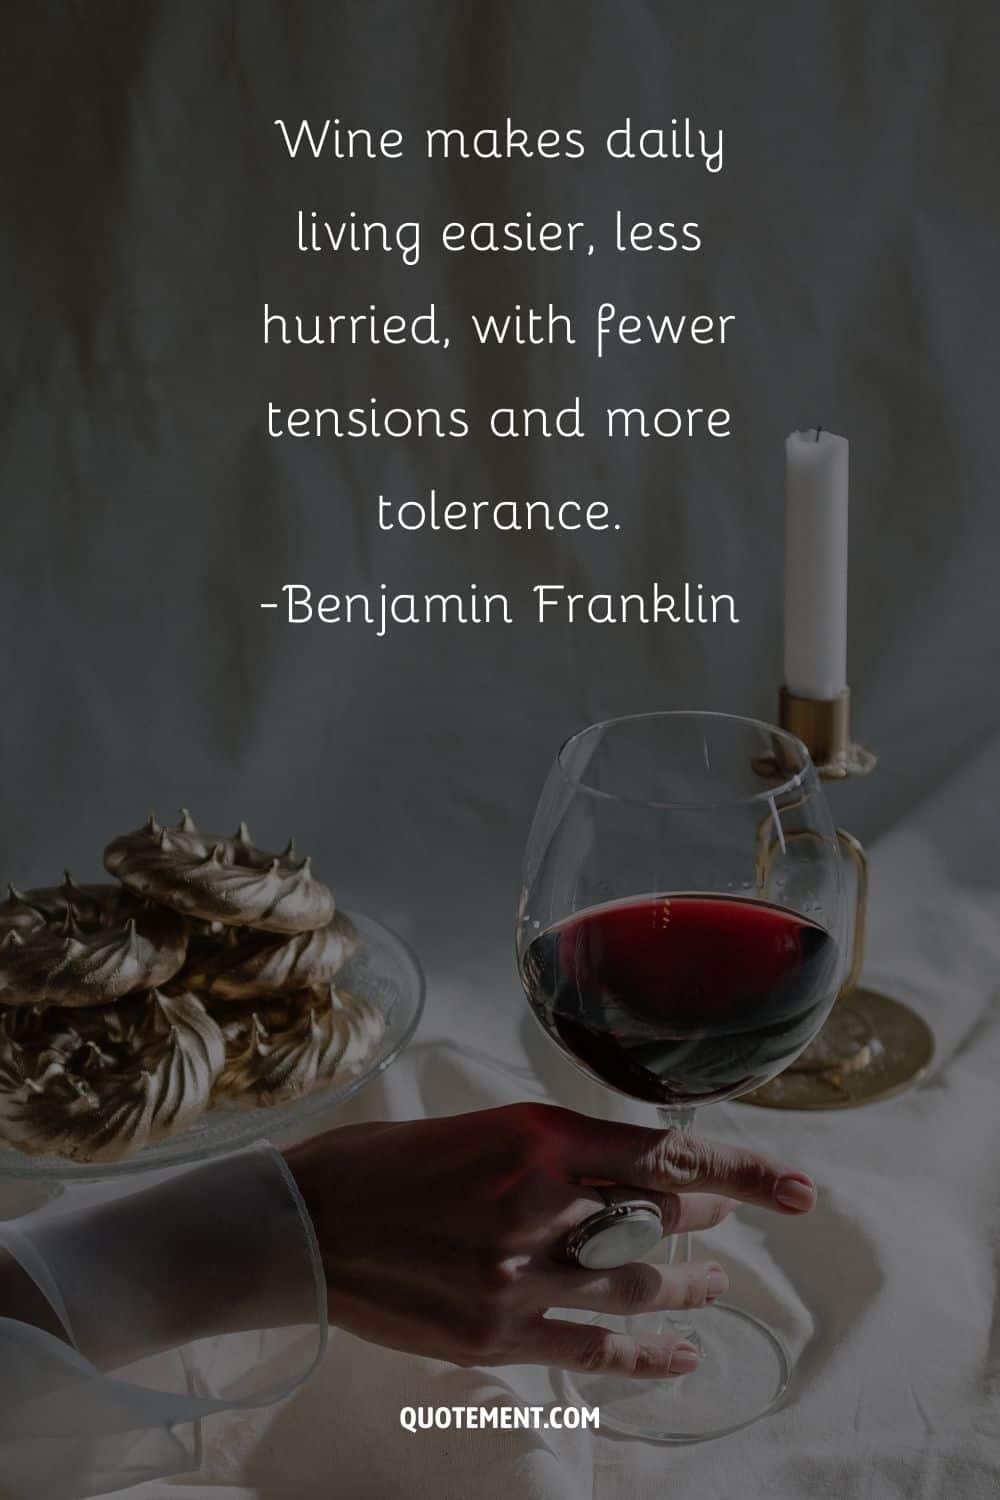 Wine makes daily living easier, less hurried, with fewer tensions and more tolerance